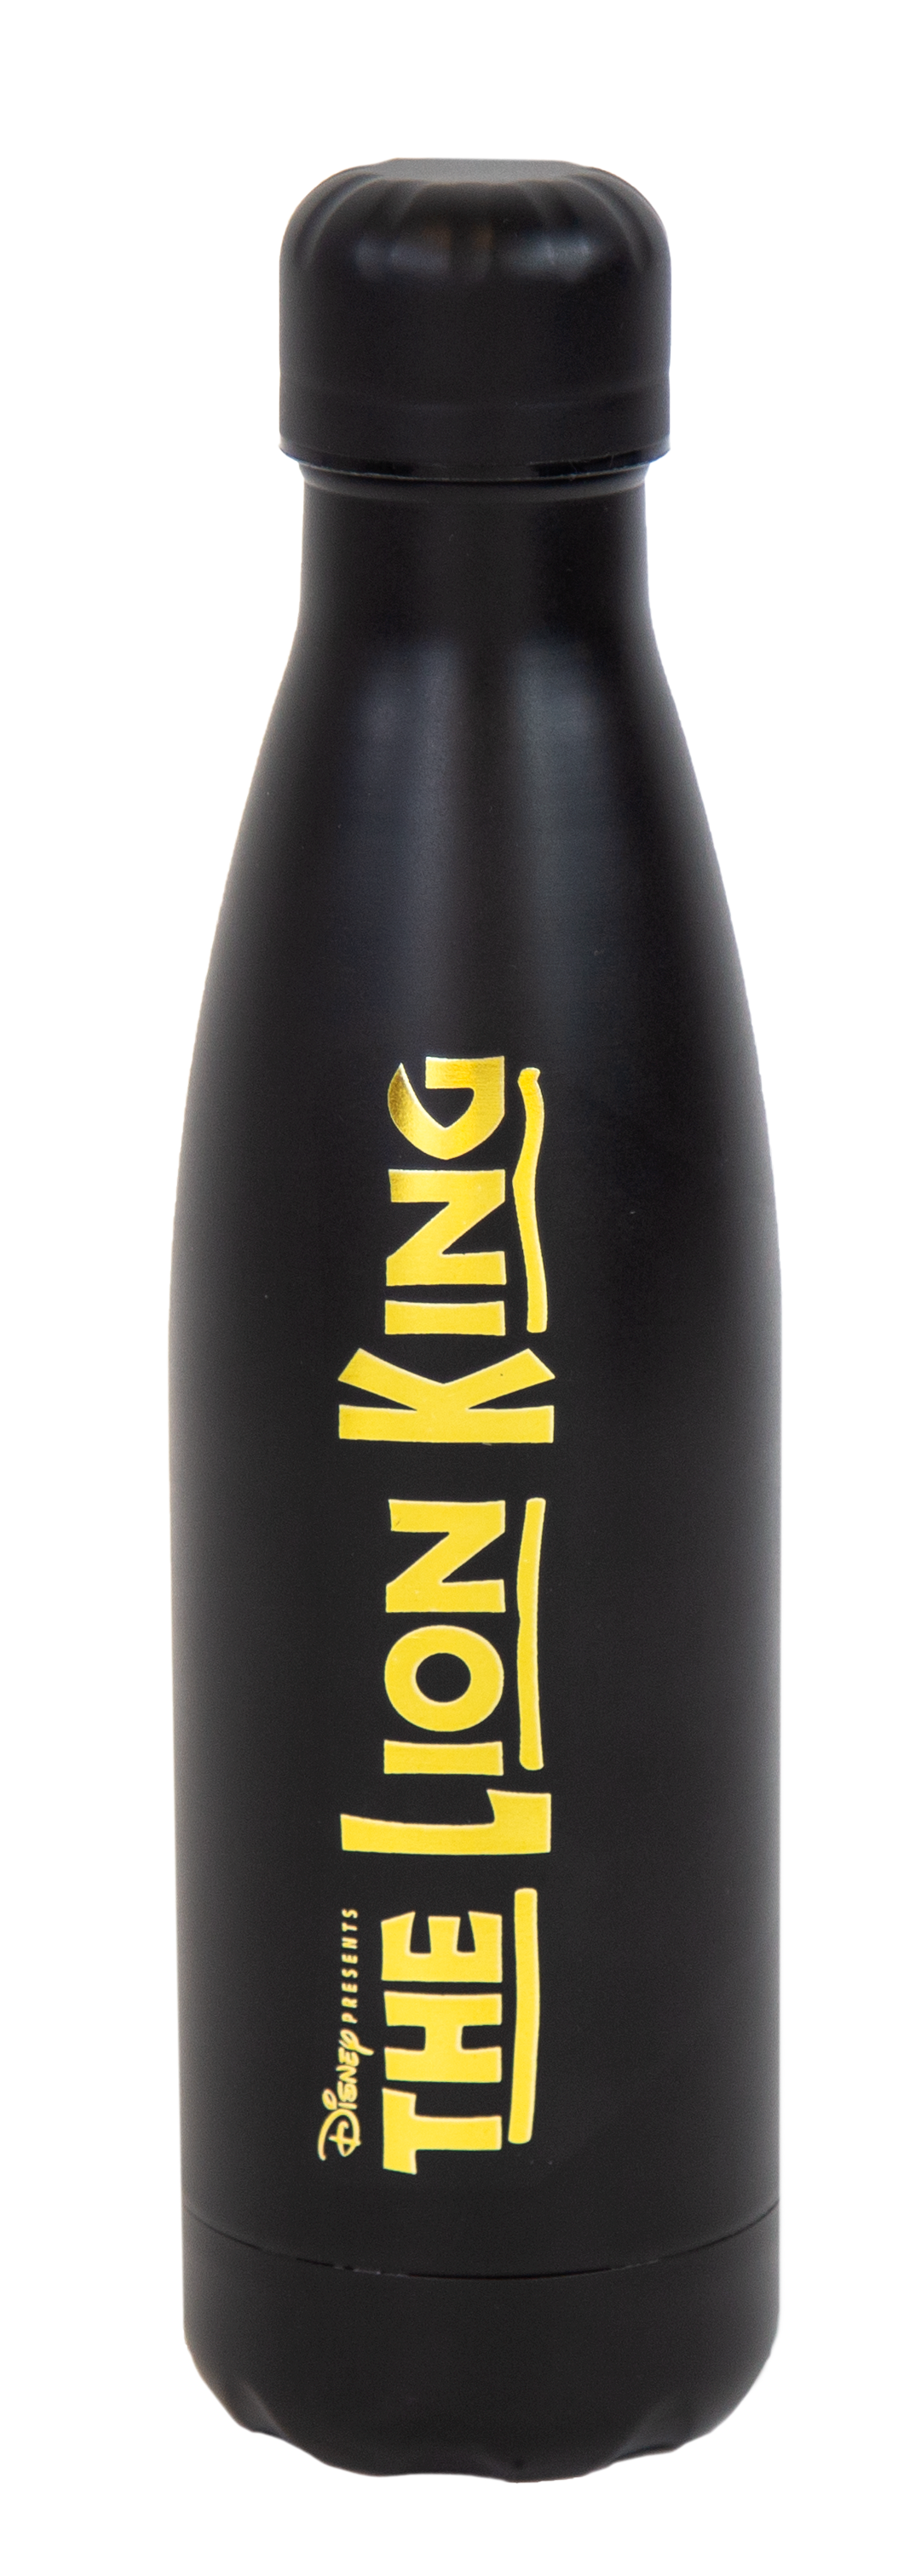 The Lion King the Broadway Musical - Metal Water Bottle